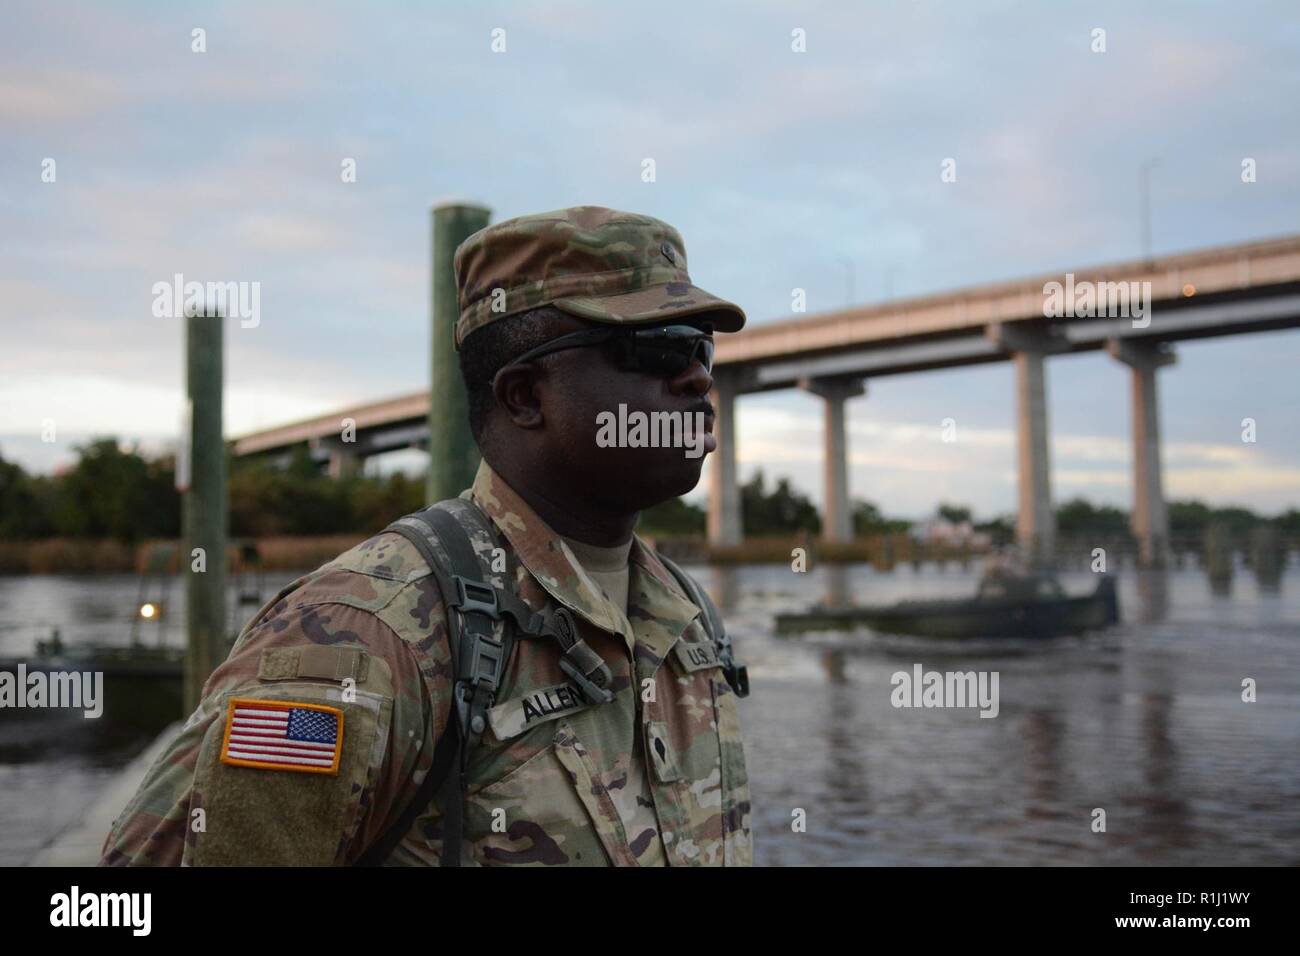 Specialist Marcus Allen, 125th Multi-Role Bridge Company crew member, poses for a portrait following a training exercise on the Sampit River in Georgetown, South Carolina on Sept. 24, 2018. The South Carolina National Guard currently has more than 2,000 troops on the ground preparing for the flooding aftermath of Hurricane Florence. Stock Photo